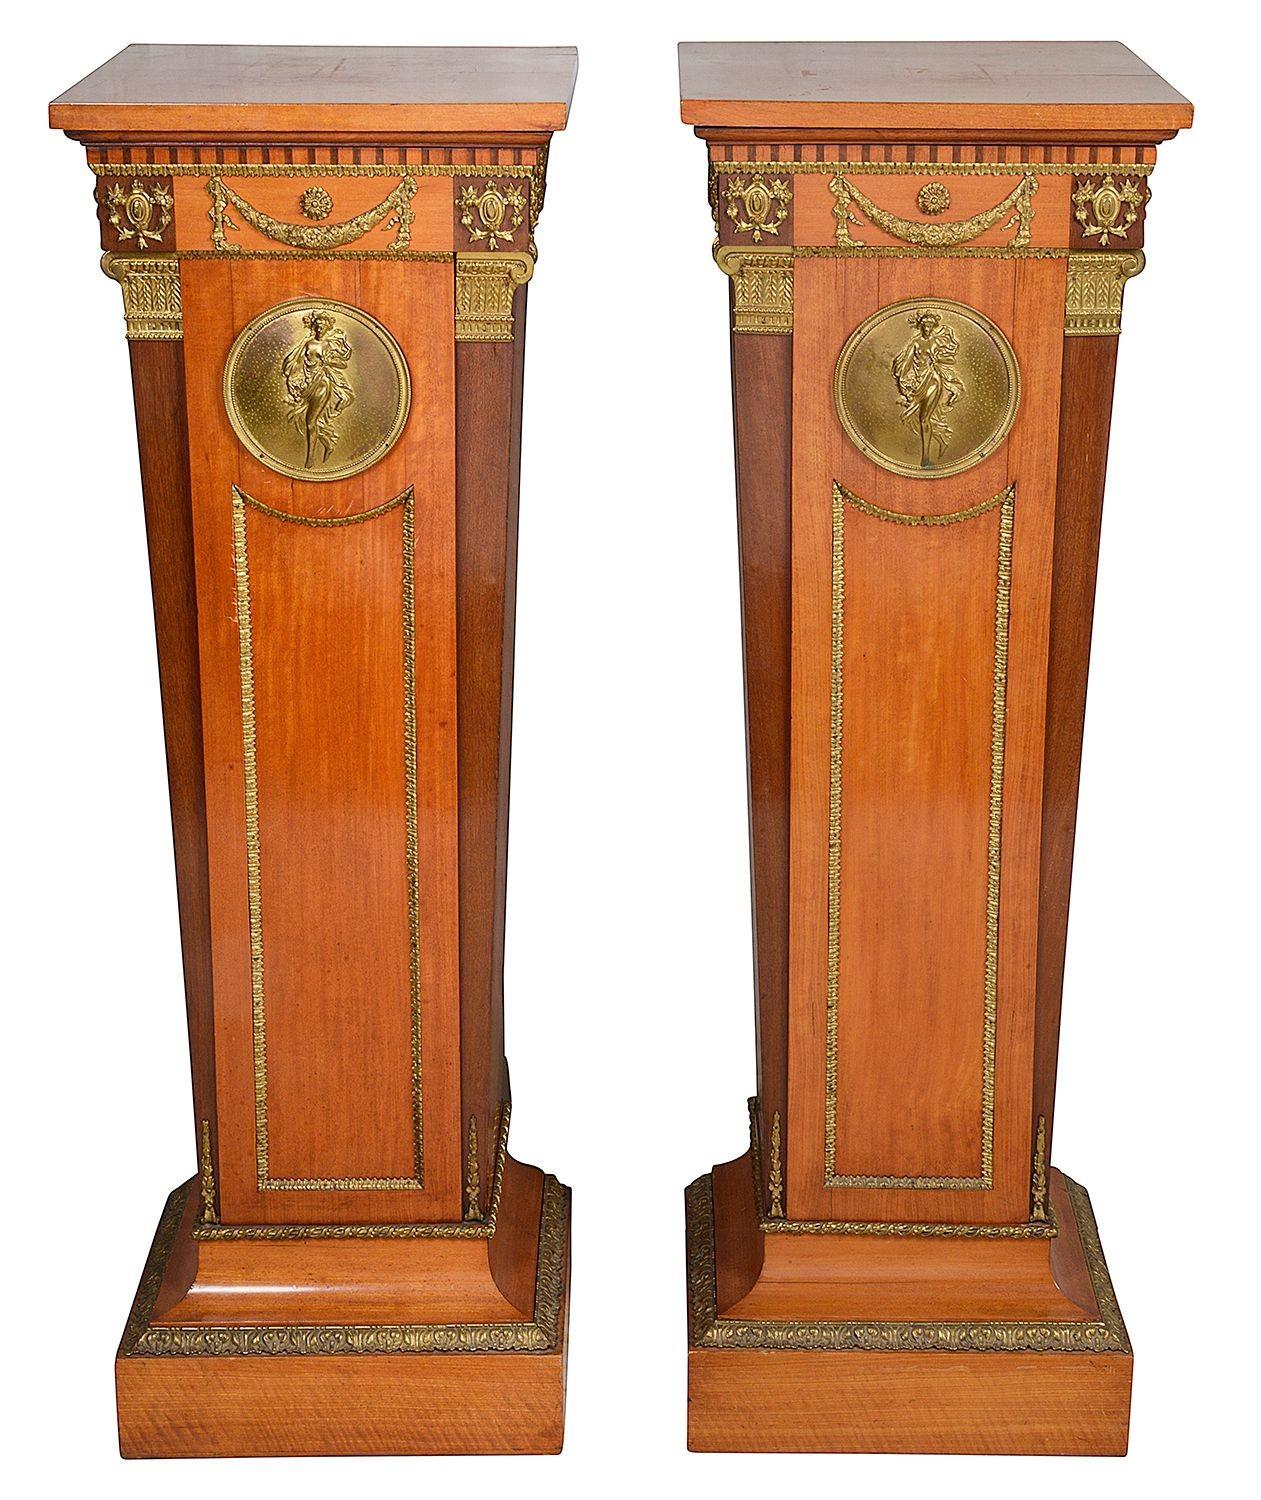 A very good quality pair of late 19th century mahogany veneered classical tapering pedestals to support sculpture. Each with wonderful gilded ormolu mounts, mouldings and plaques.

UNYKZ. 61458. Batch 69.